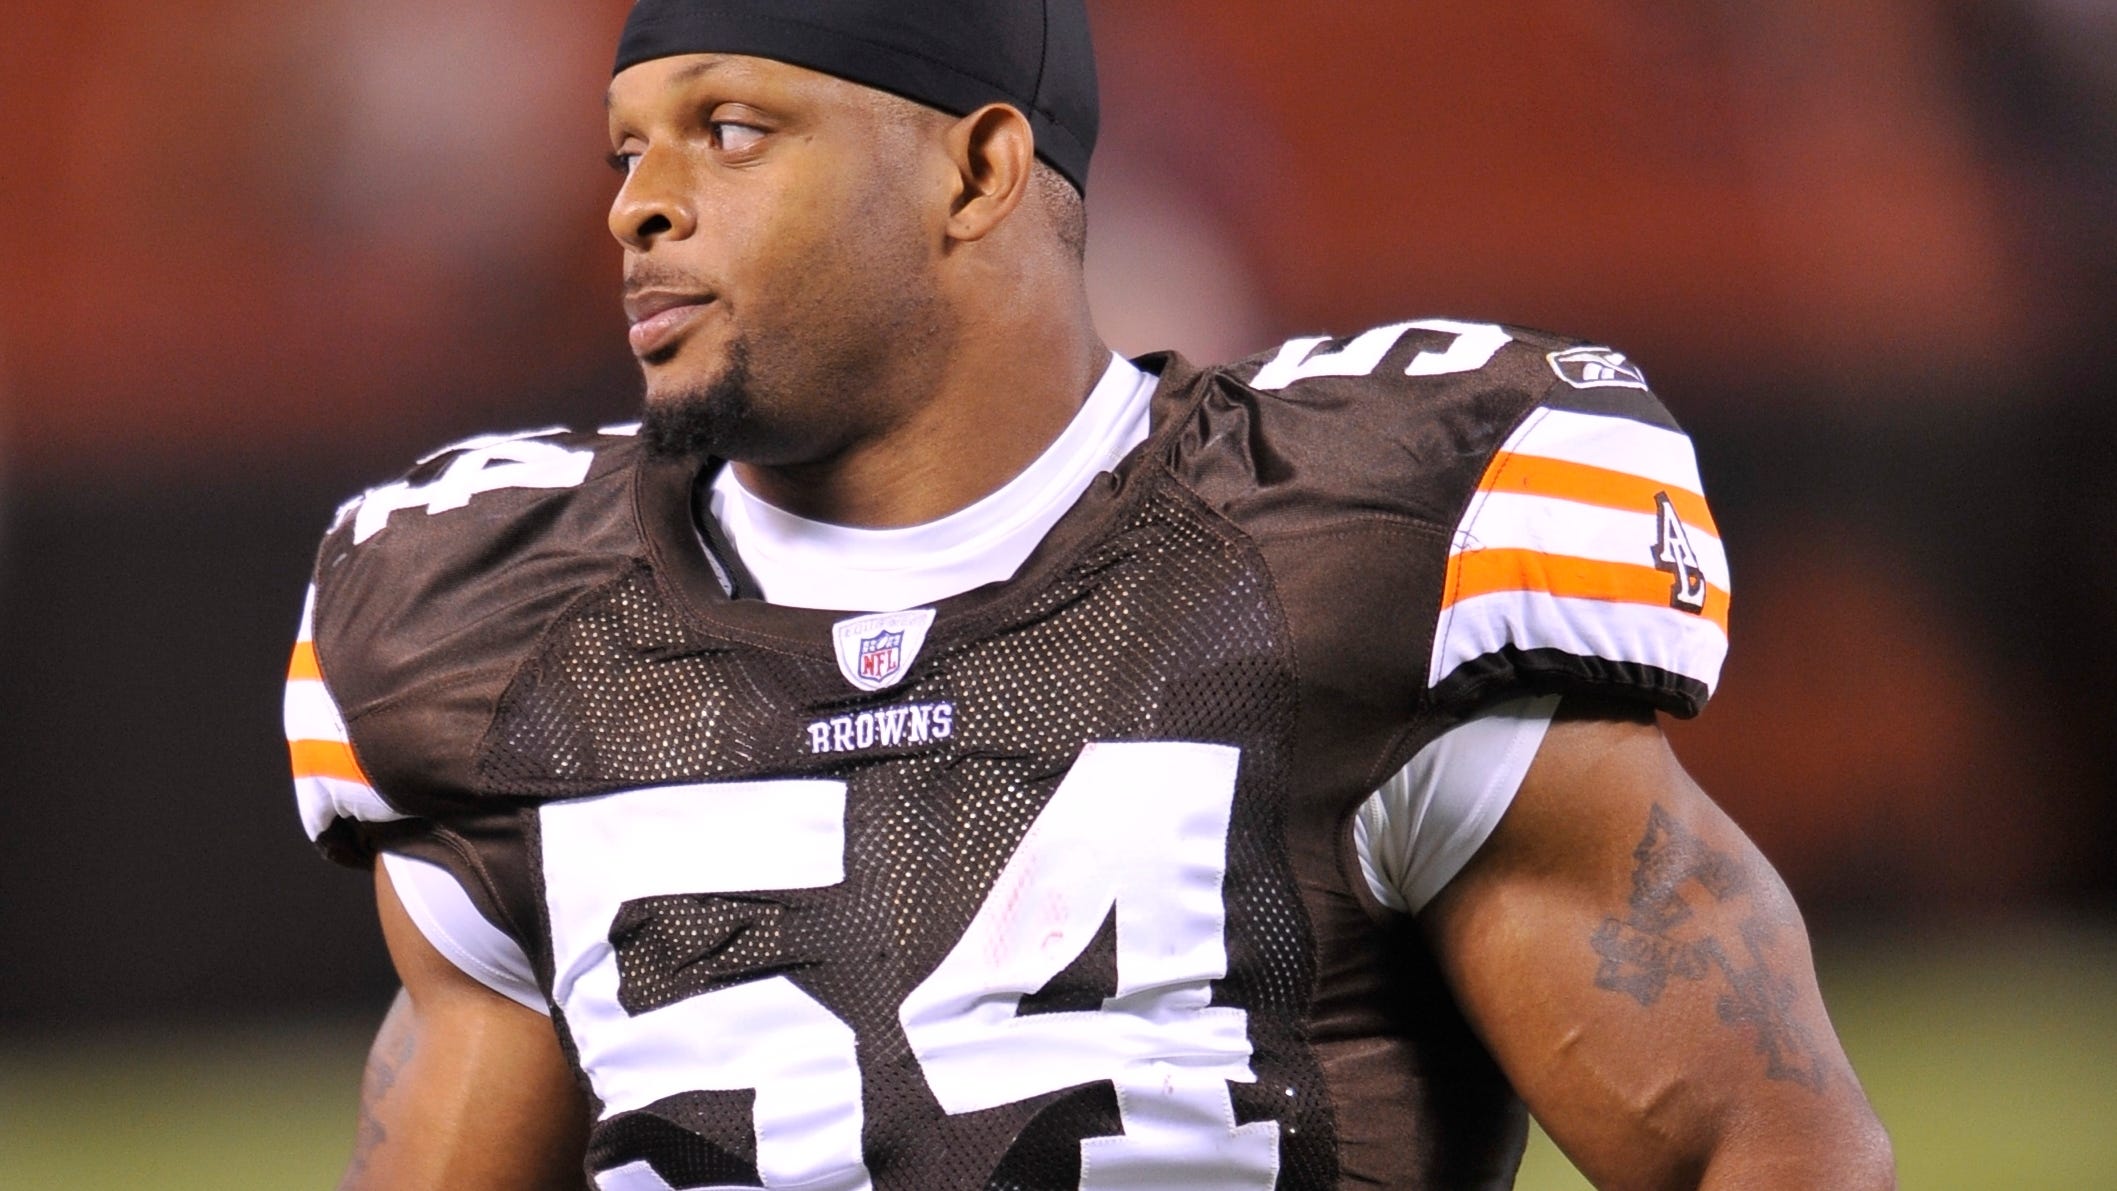 Robert McCune the former Cleveland Browns linebacker will be spending the next several years of his life in prison